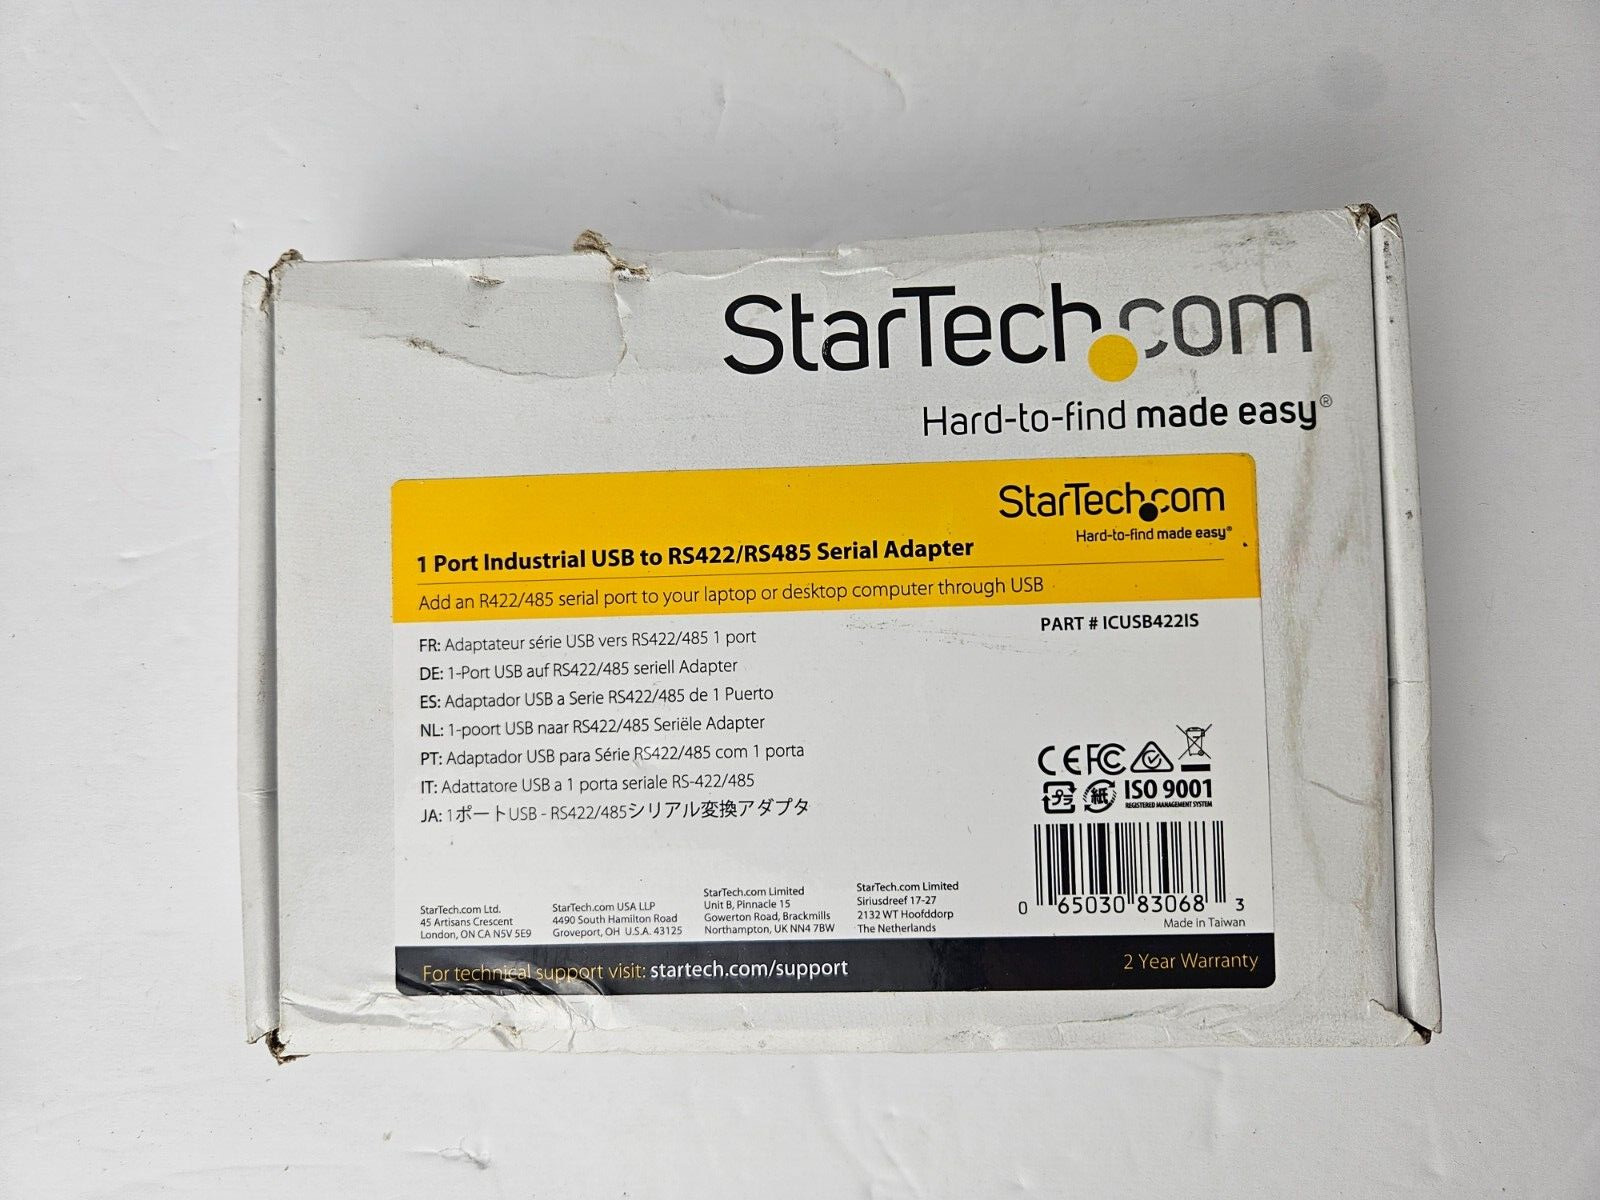 StarTech.com ICUSB422IS 1 Port Industrial USB to RS422/RS485 Serial Adapter